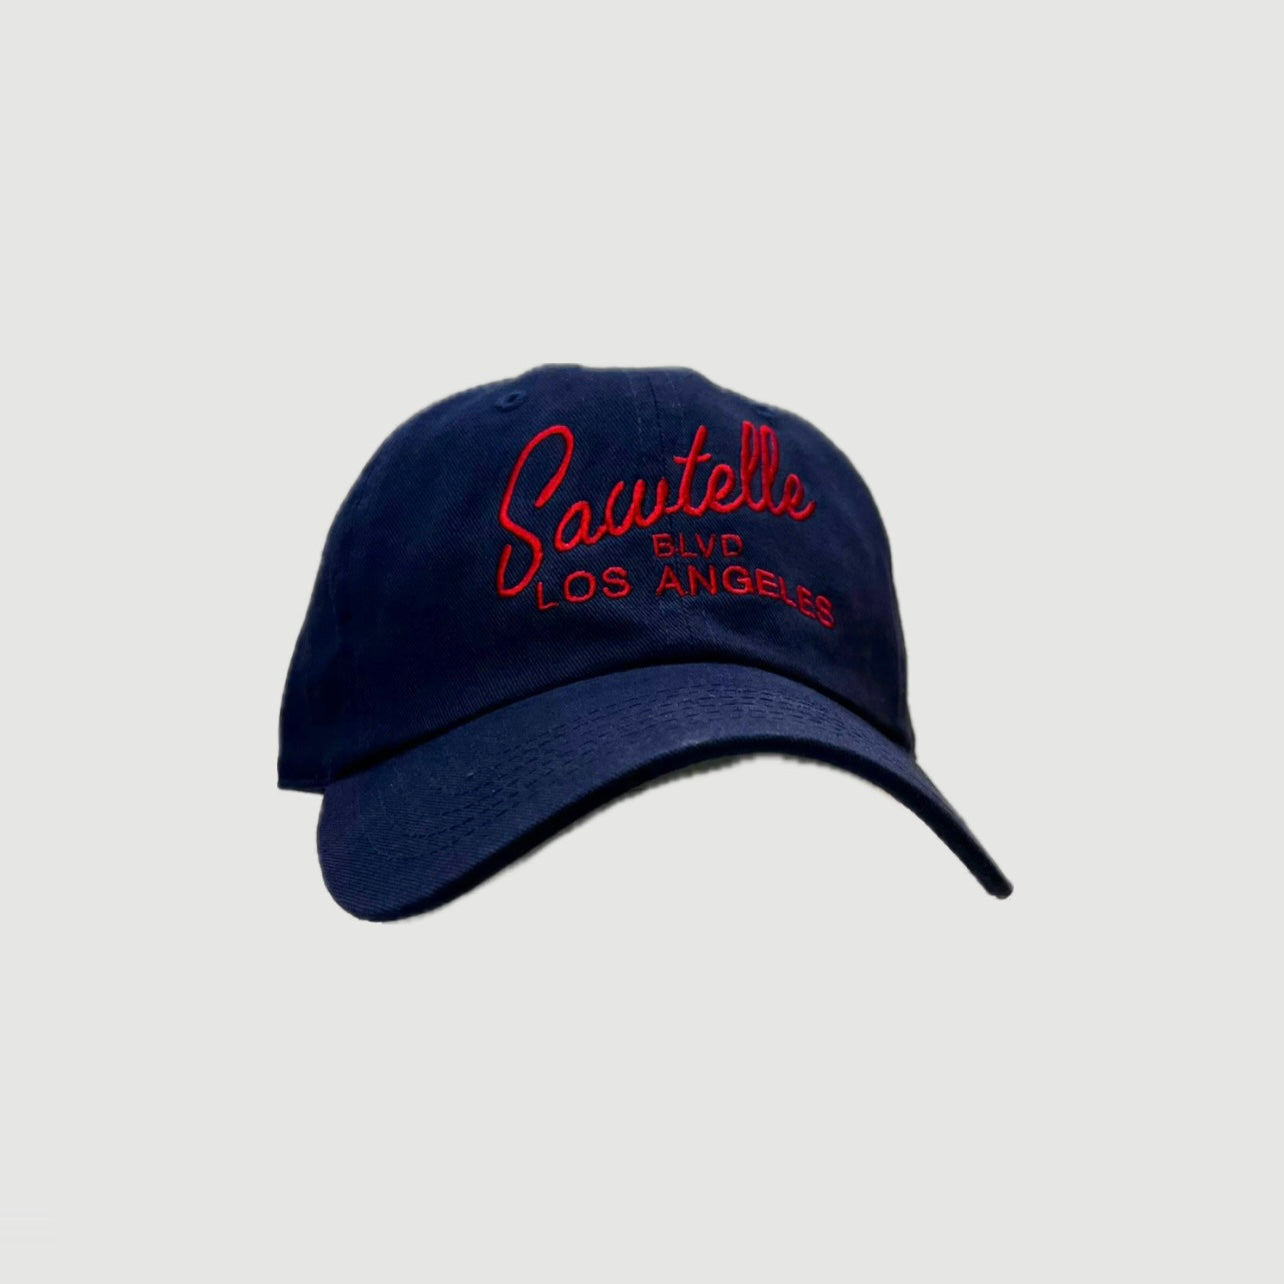 ONLY THE LONELY SAWTELLE DAD'S CAP (NAVY/RED)